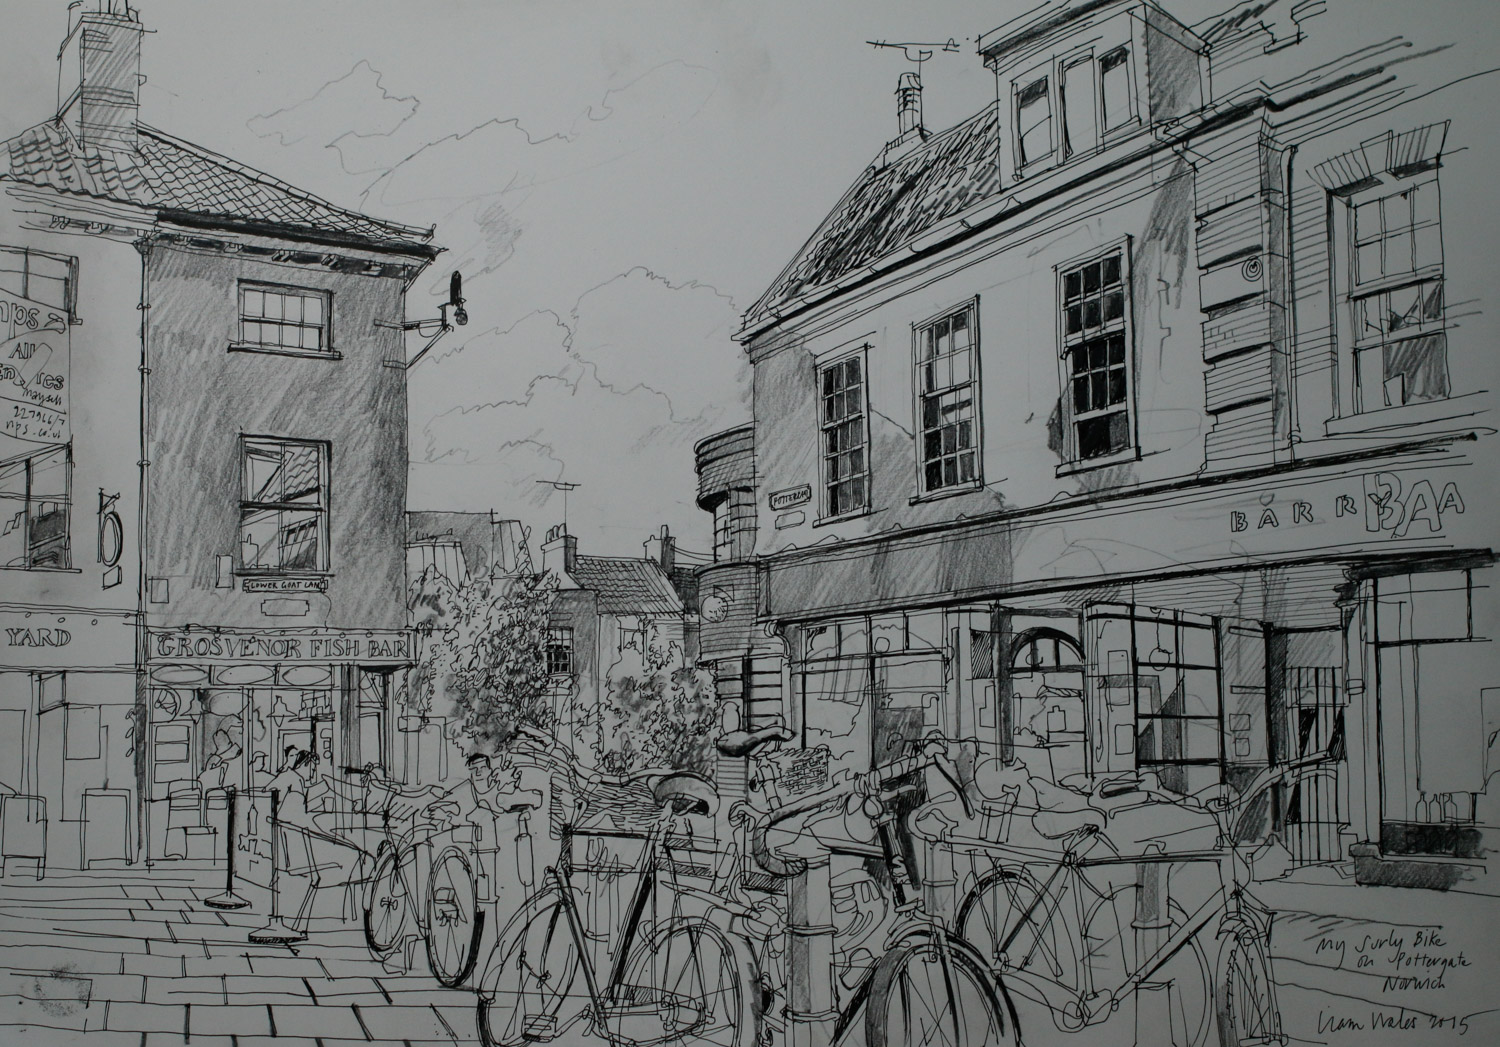 Artist Liam Wales - My Surly Bike on Pottergate, £750 16x24 Ink & Charcoal on Paper at Paint Out Norwich 2015